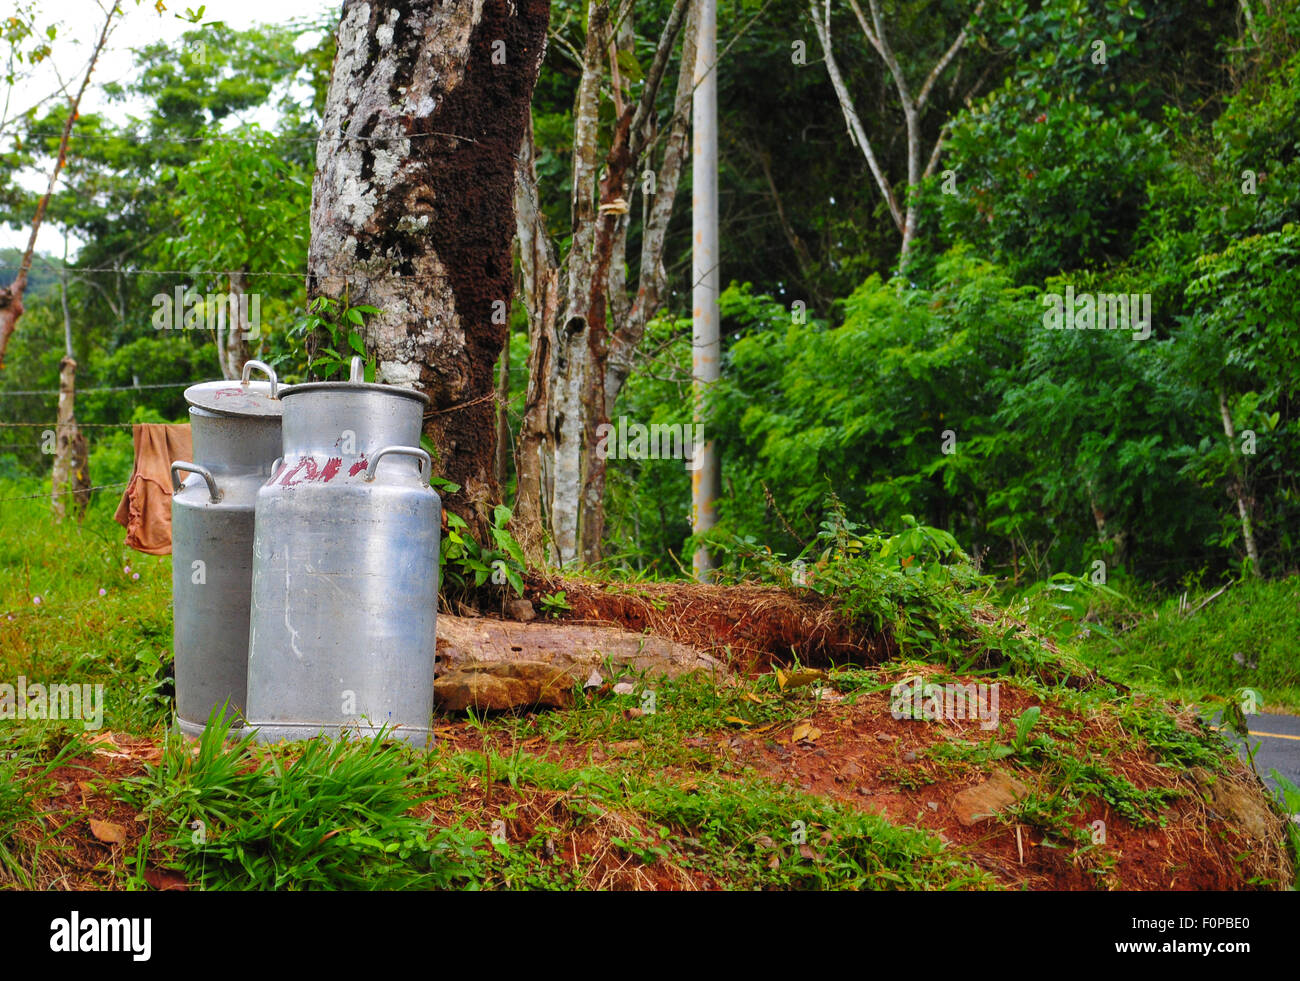 Two old milk containers by the side of a country road waiting to be pick up Stock Photo